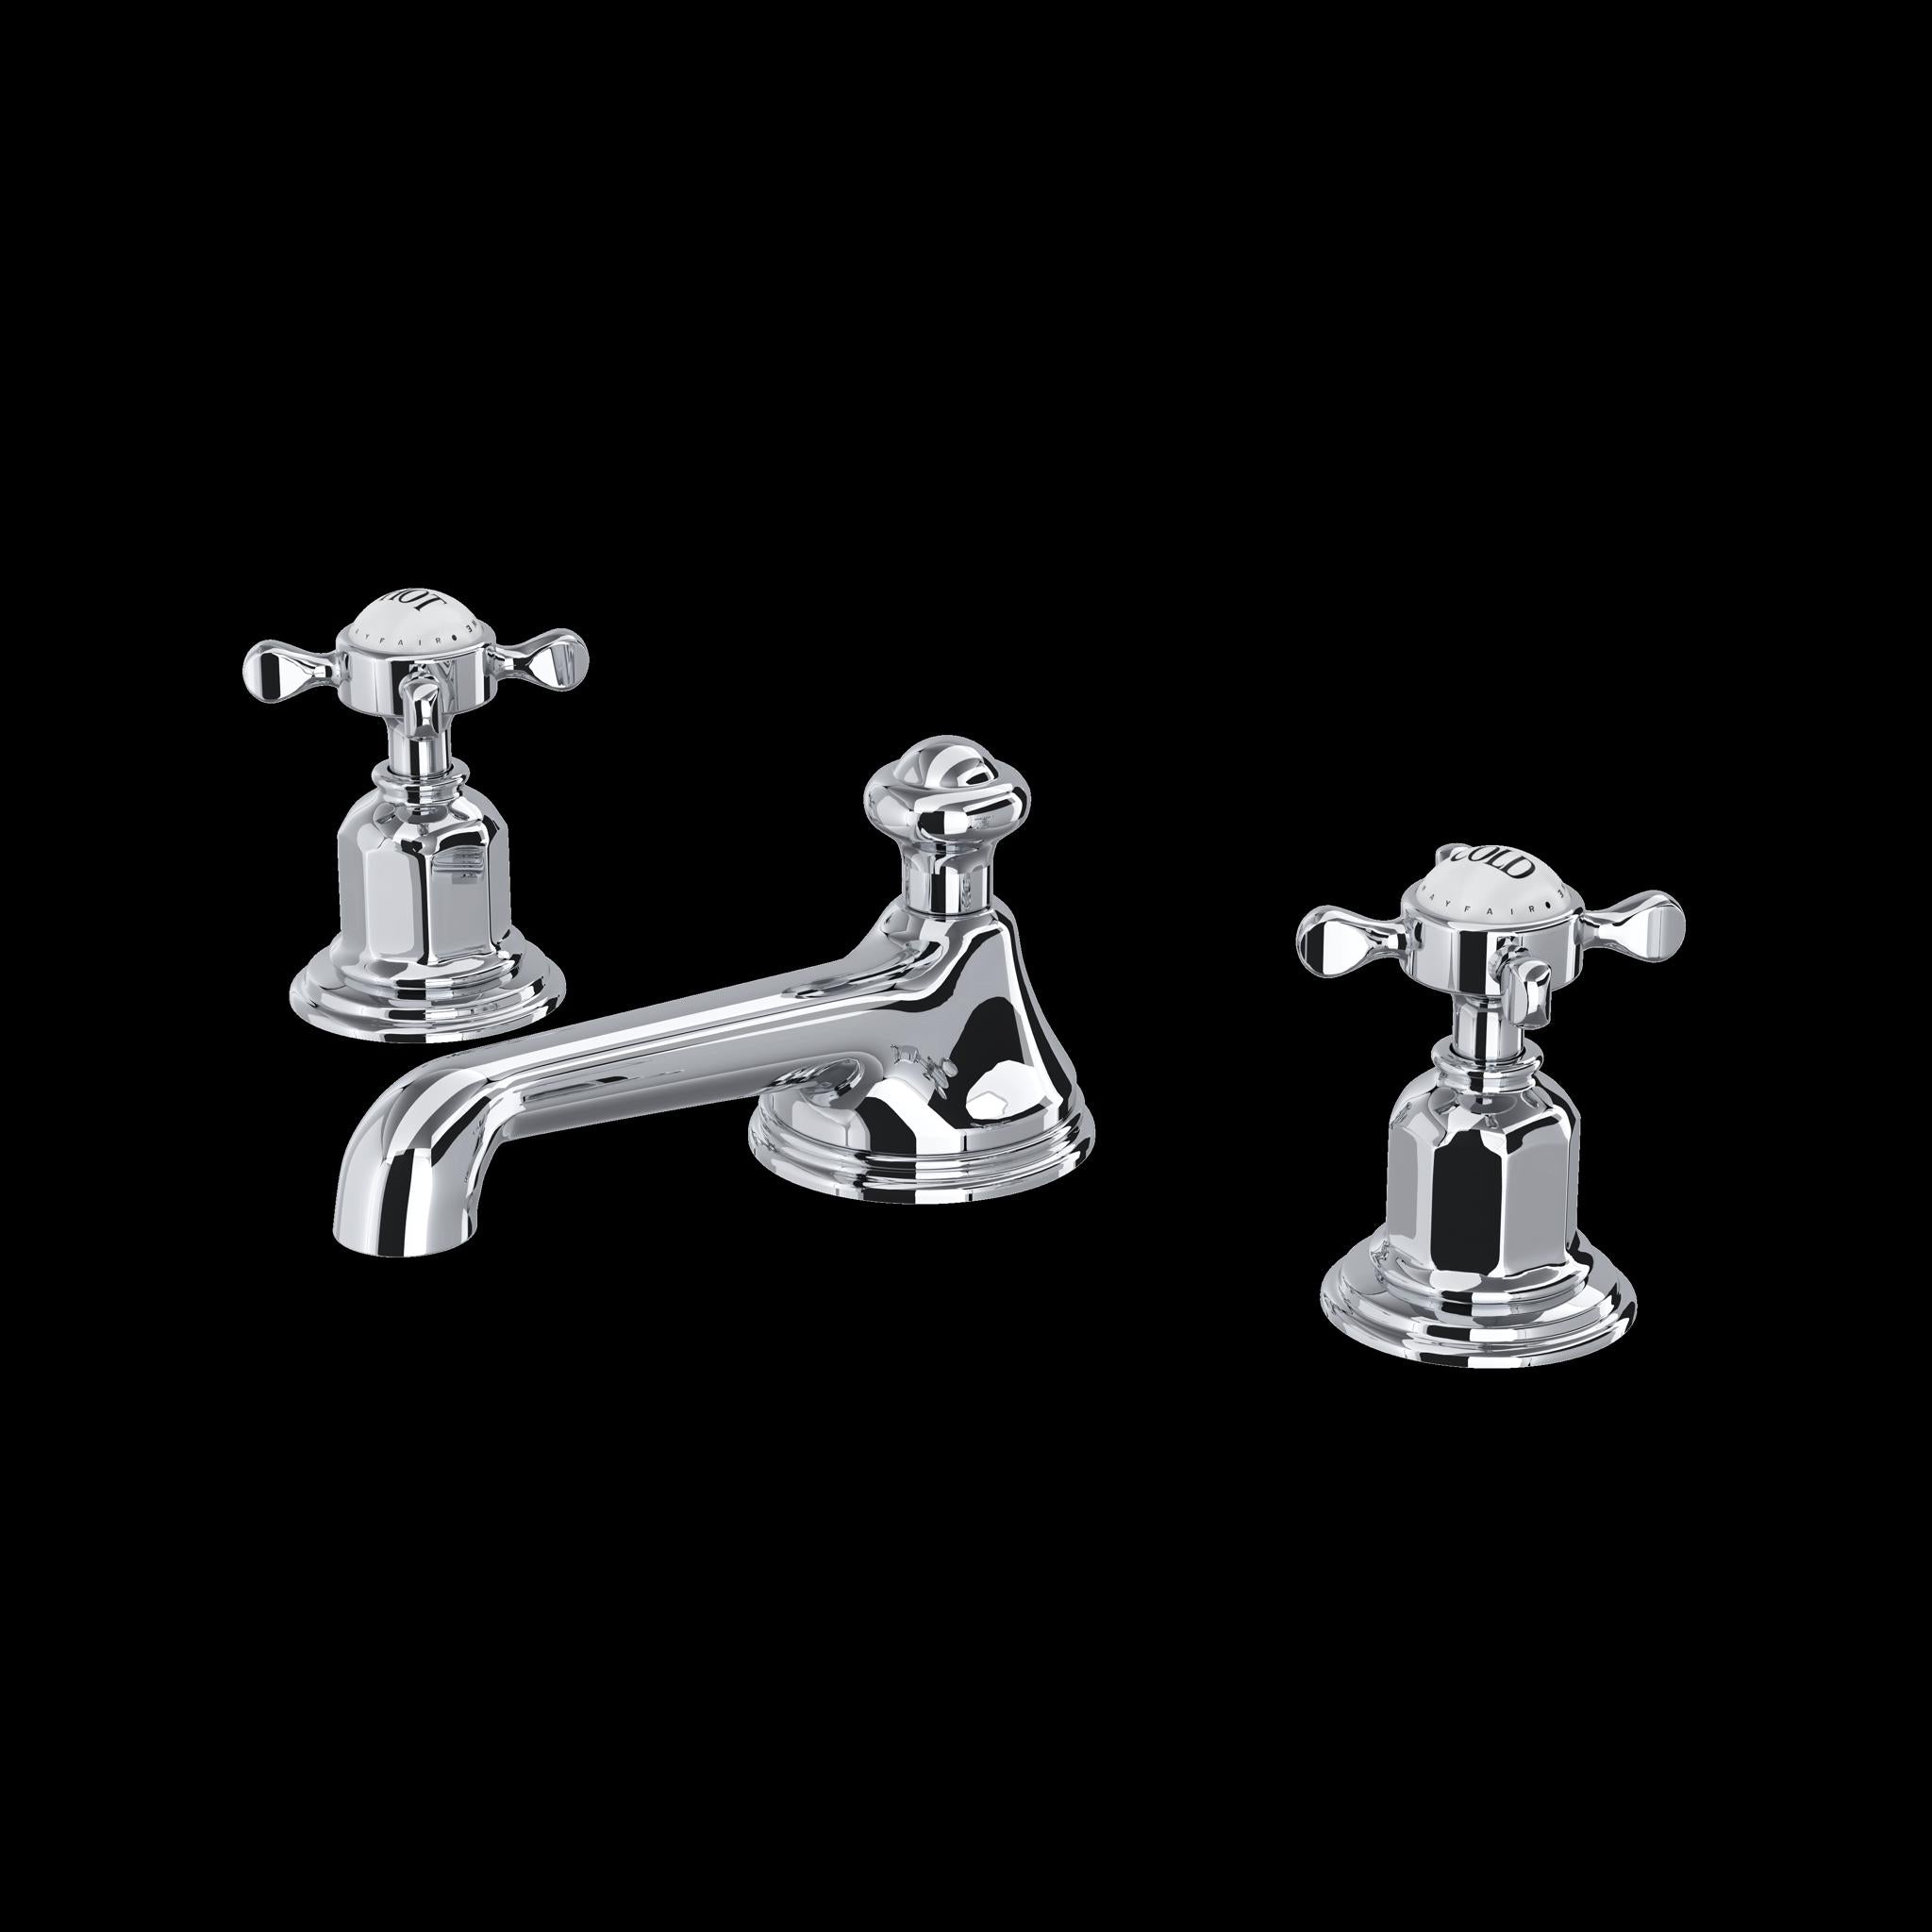 Perrin & Rowe U.3706 Edwardian Widespread Lavatory Faucet With Low Spout